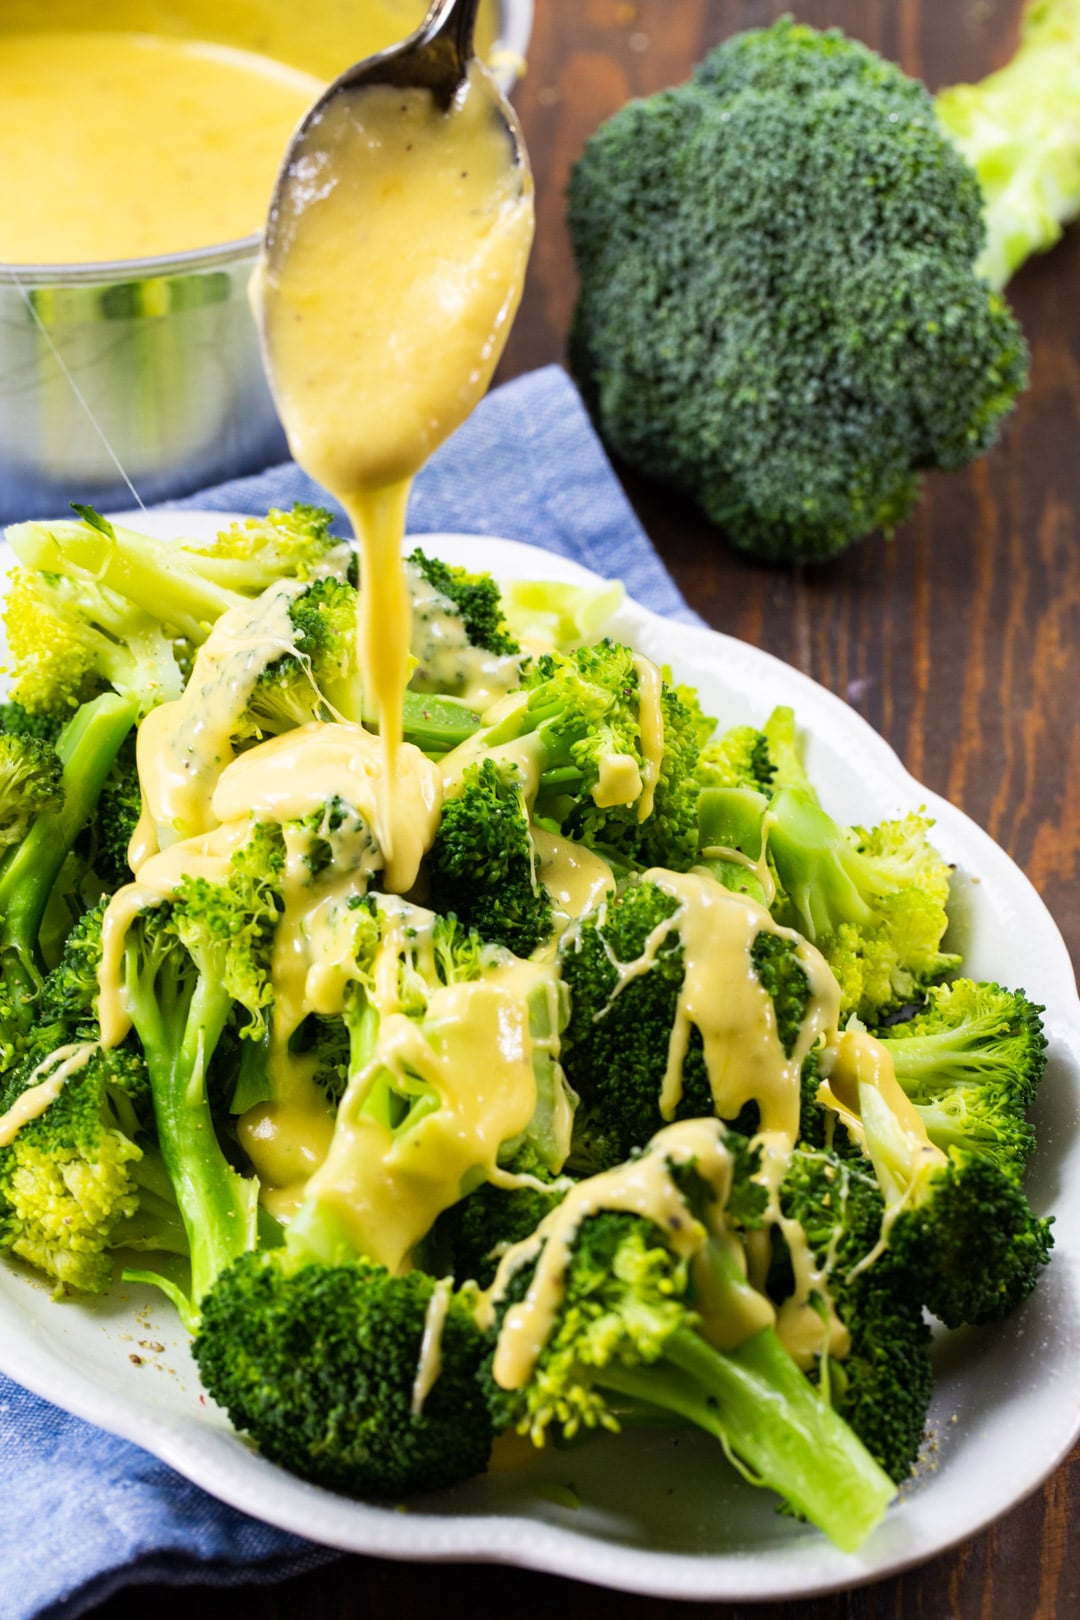 Cheddar sauce getting drizzled on broccoli.